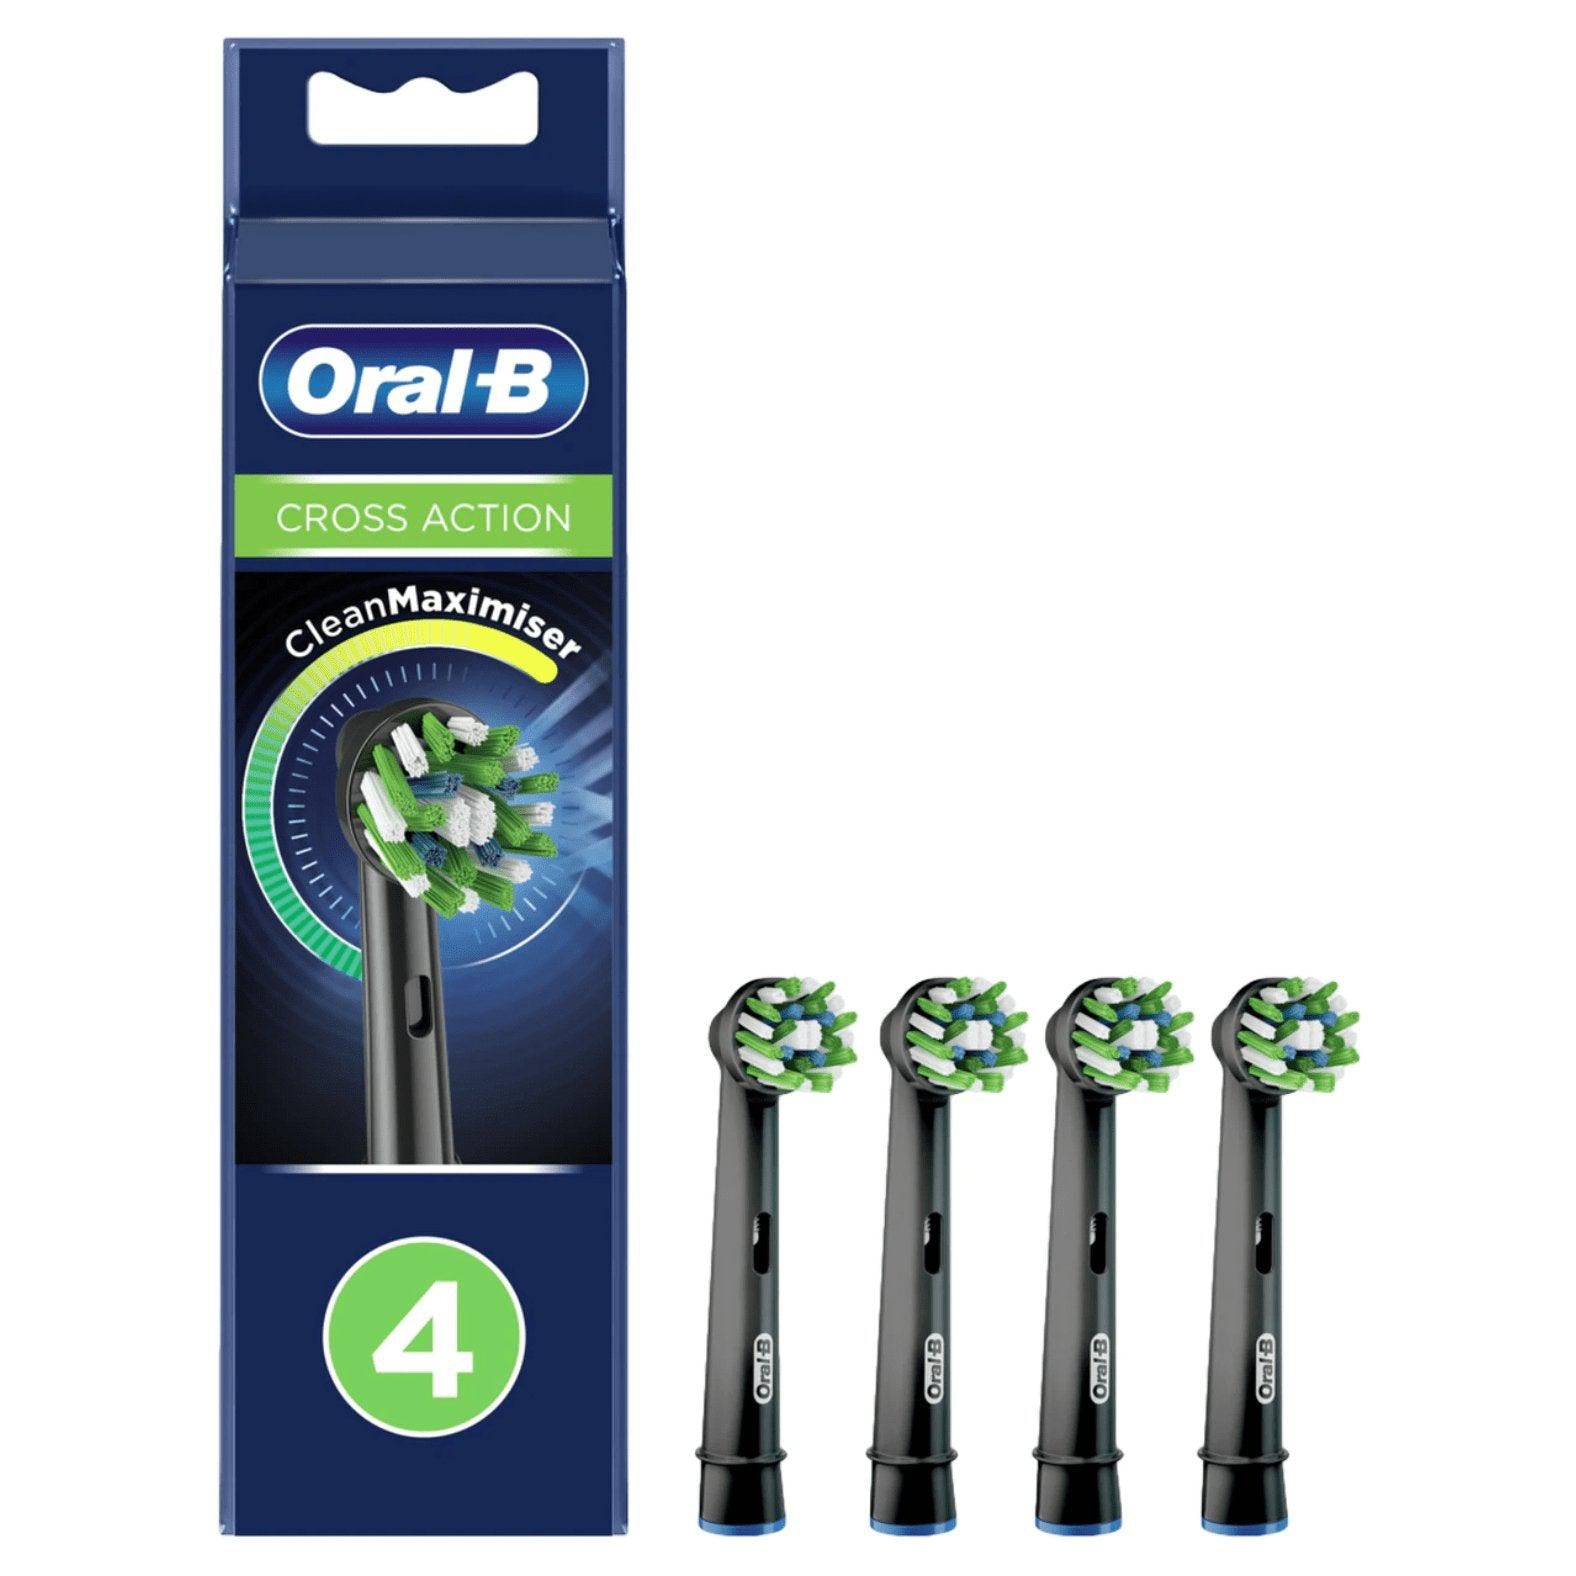 Oral-B CrossAction 4pk Toothbrush Replacement Heads - Black - Pack of 4 - with CleanMaximiser Technology - Healthxpress.ie